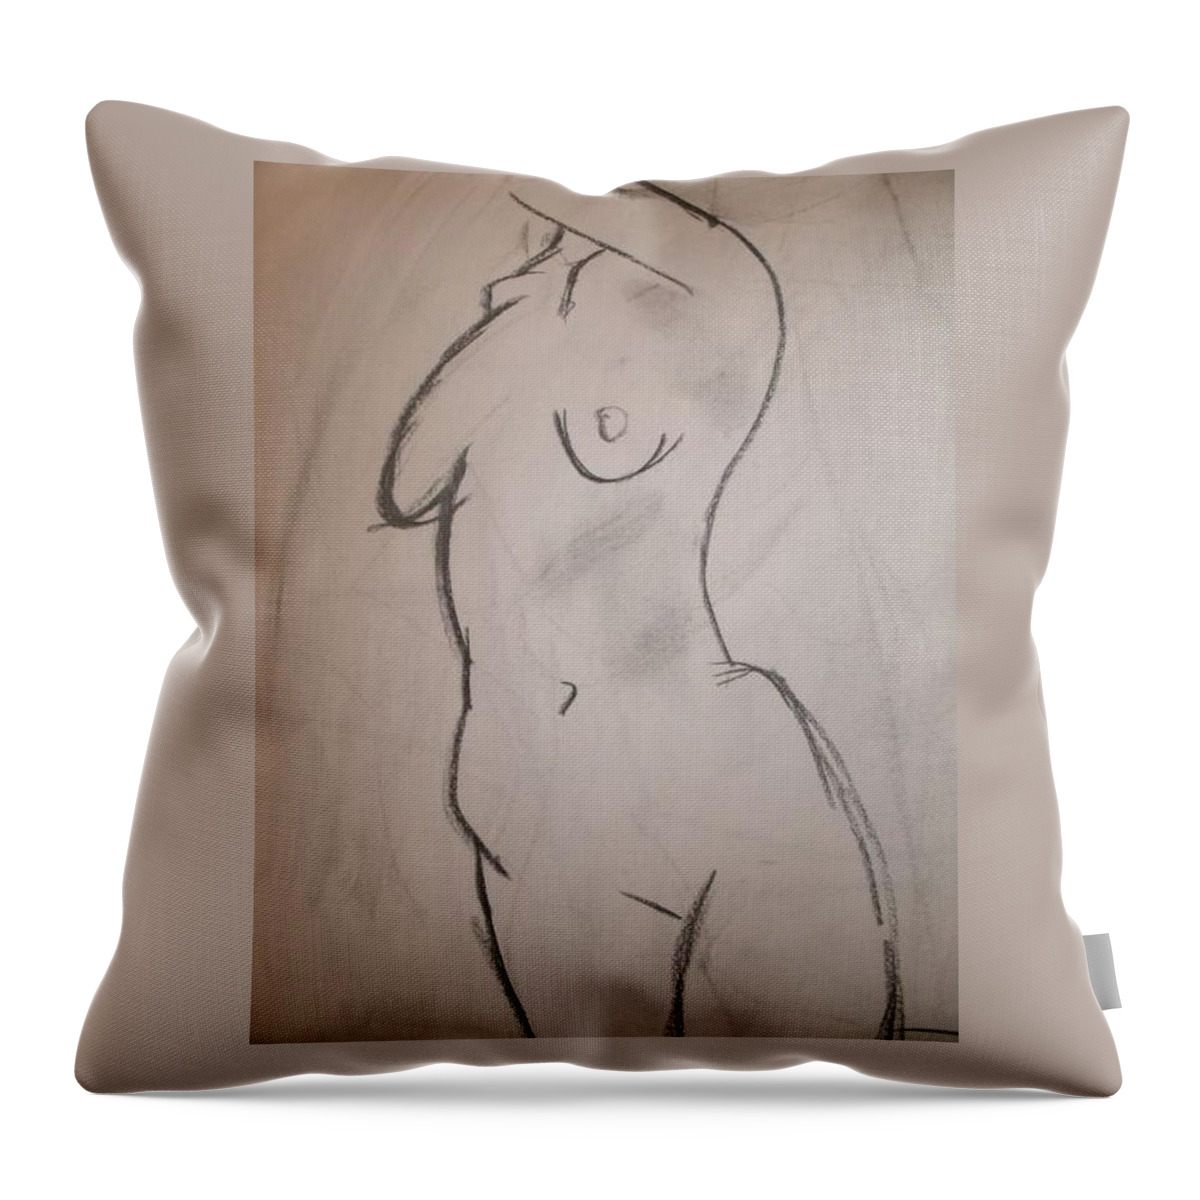 Female Throw Pillow featuring the drawing Figure by Samantha Lusby